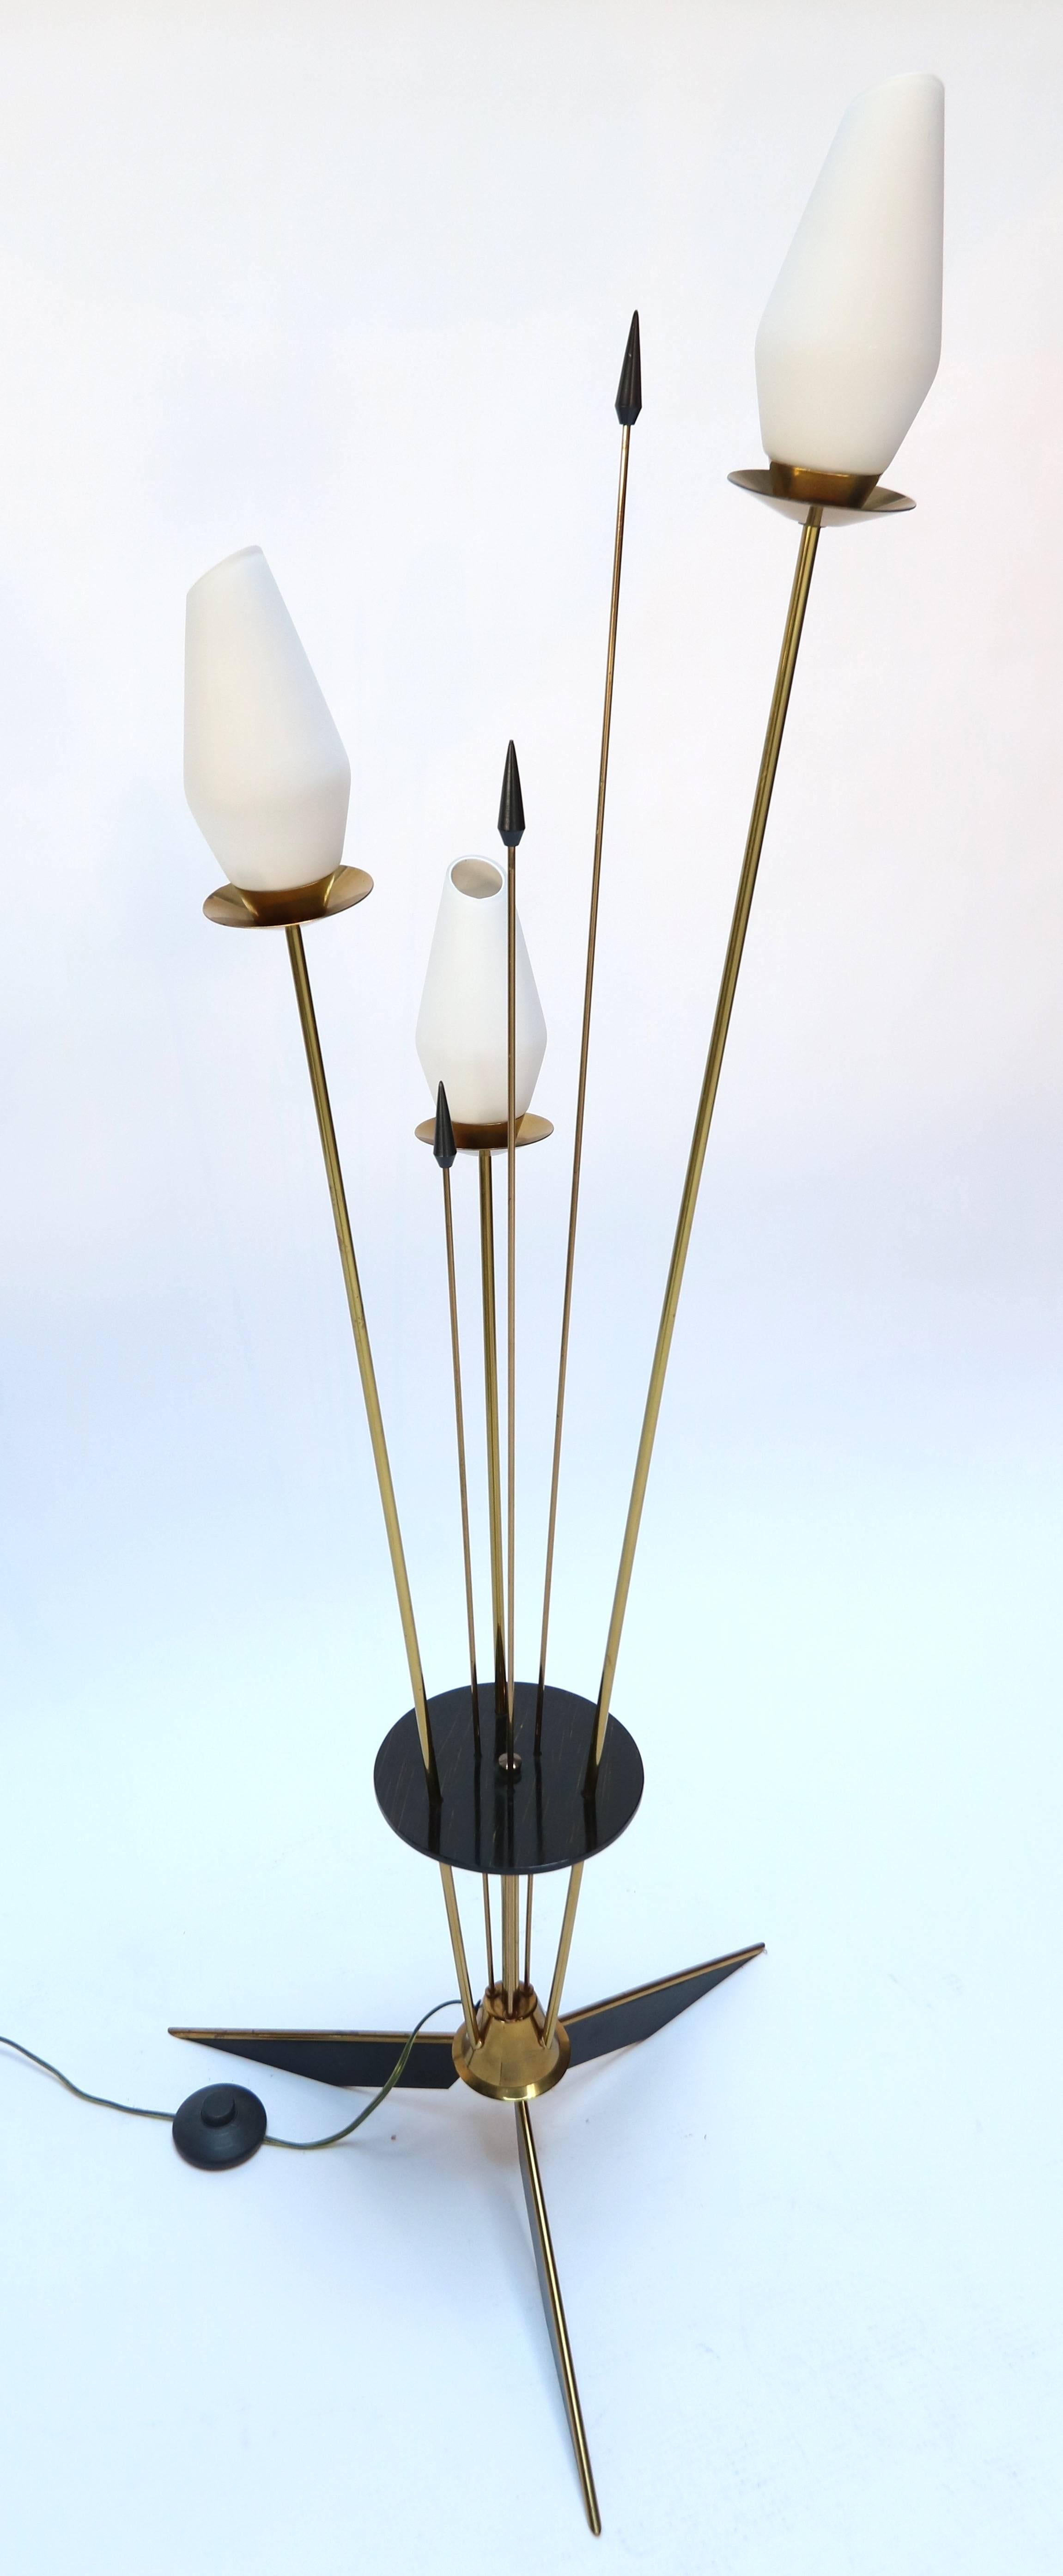 French Brass and Black Metal Floor Lamp with 3 Opaque White Glass Lights, 1950s For Sale 3